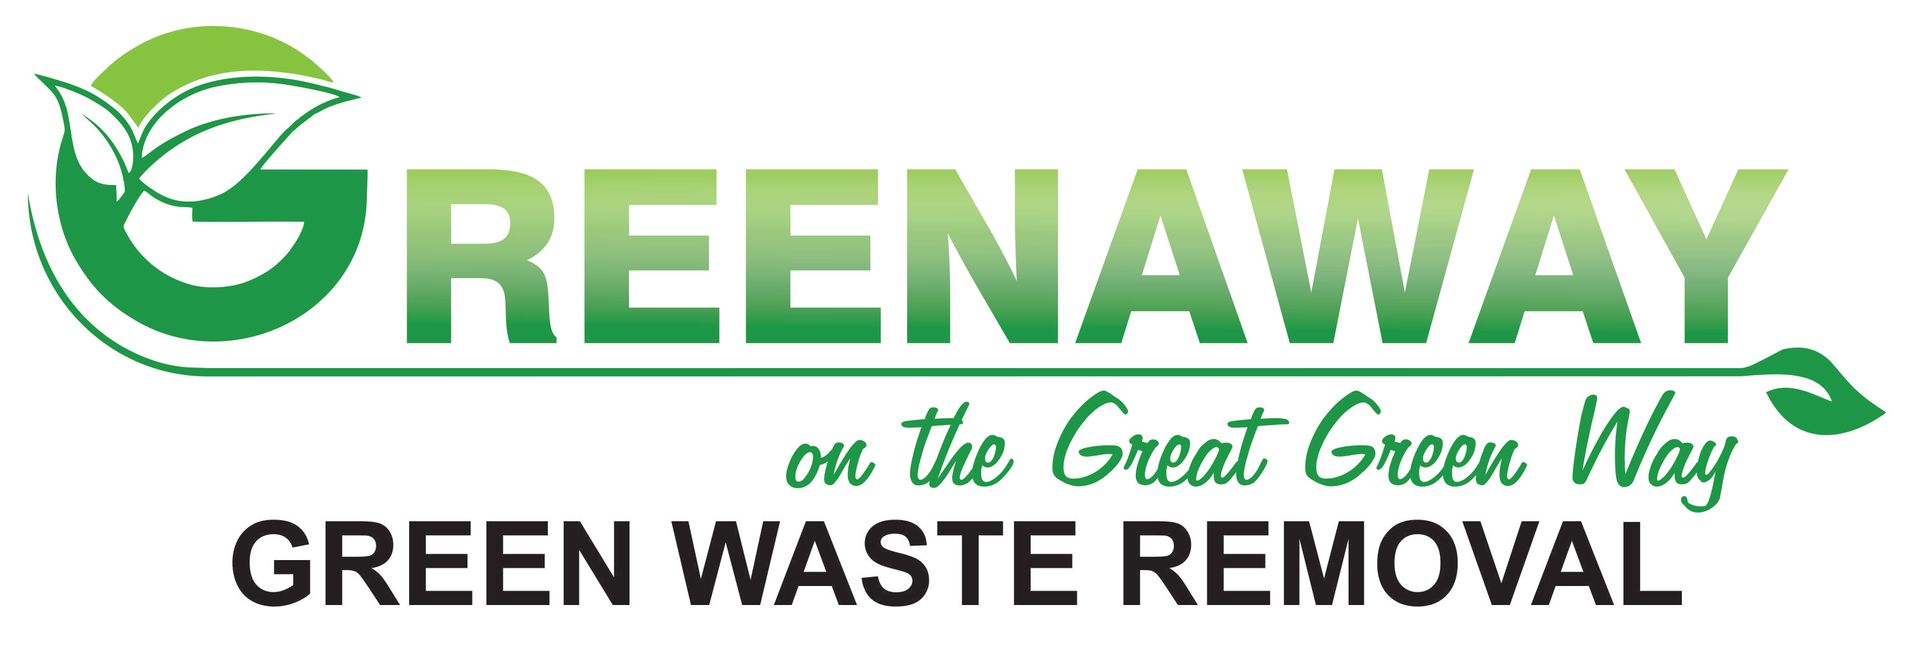 Welcome to Greenaway Green Waste Removal in Innisfail